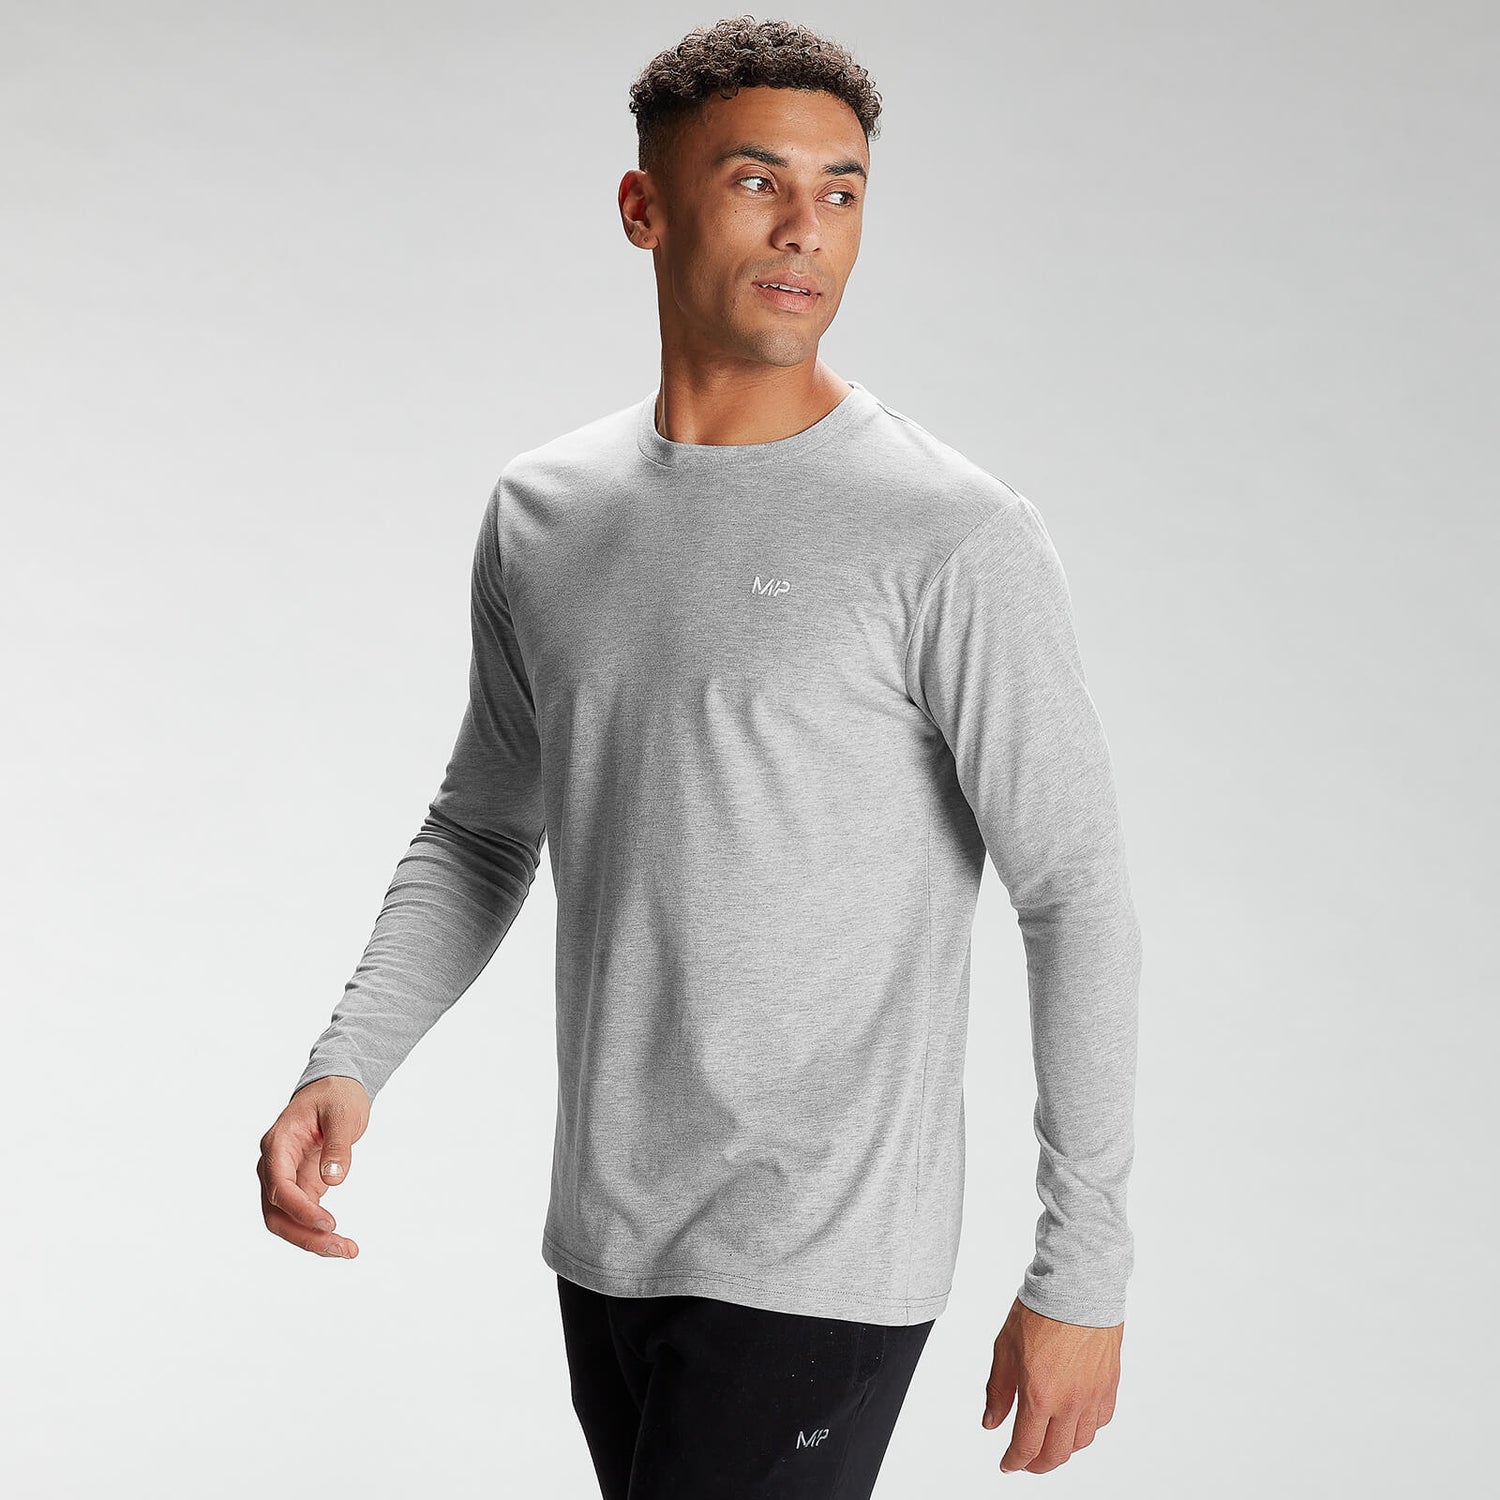 MP Men's Rest Day Long Sleeve Top - Classic Grey Marl - S